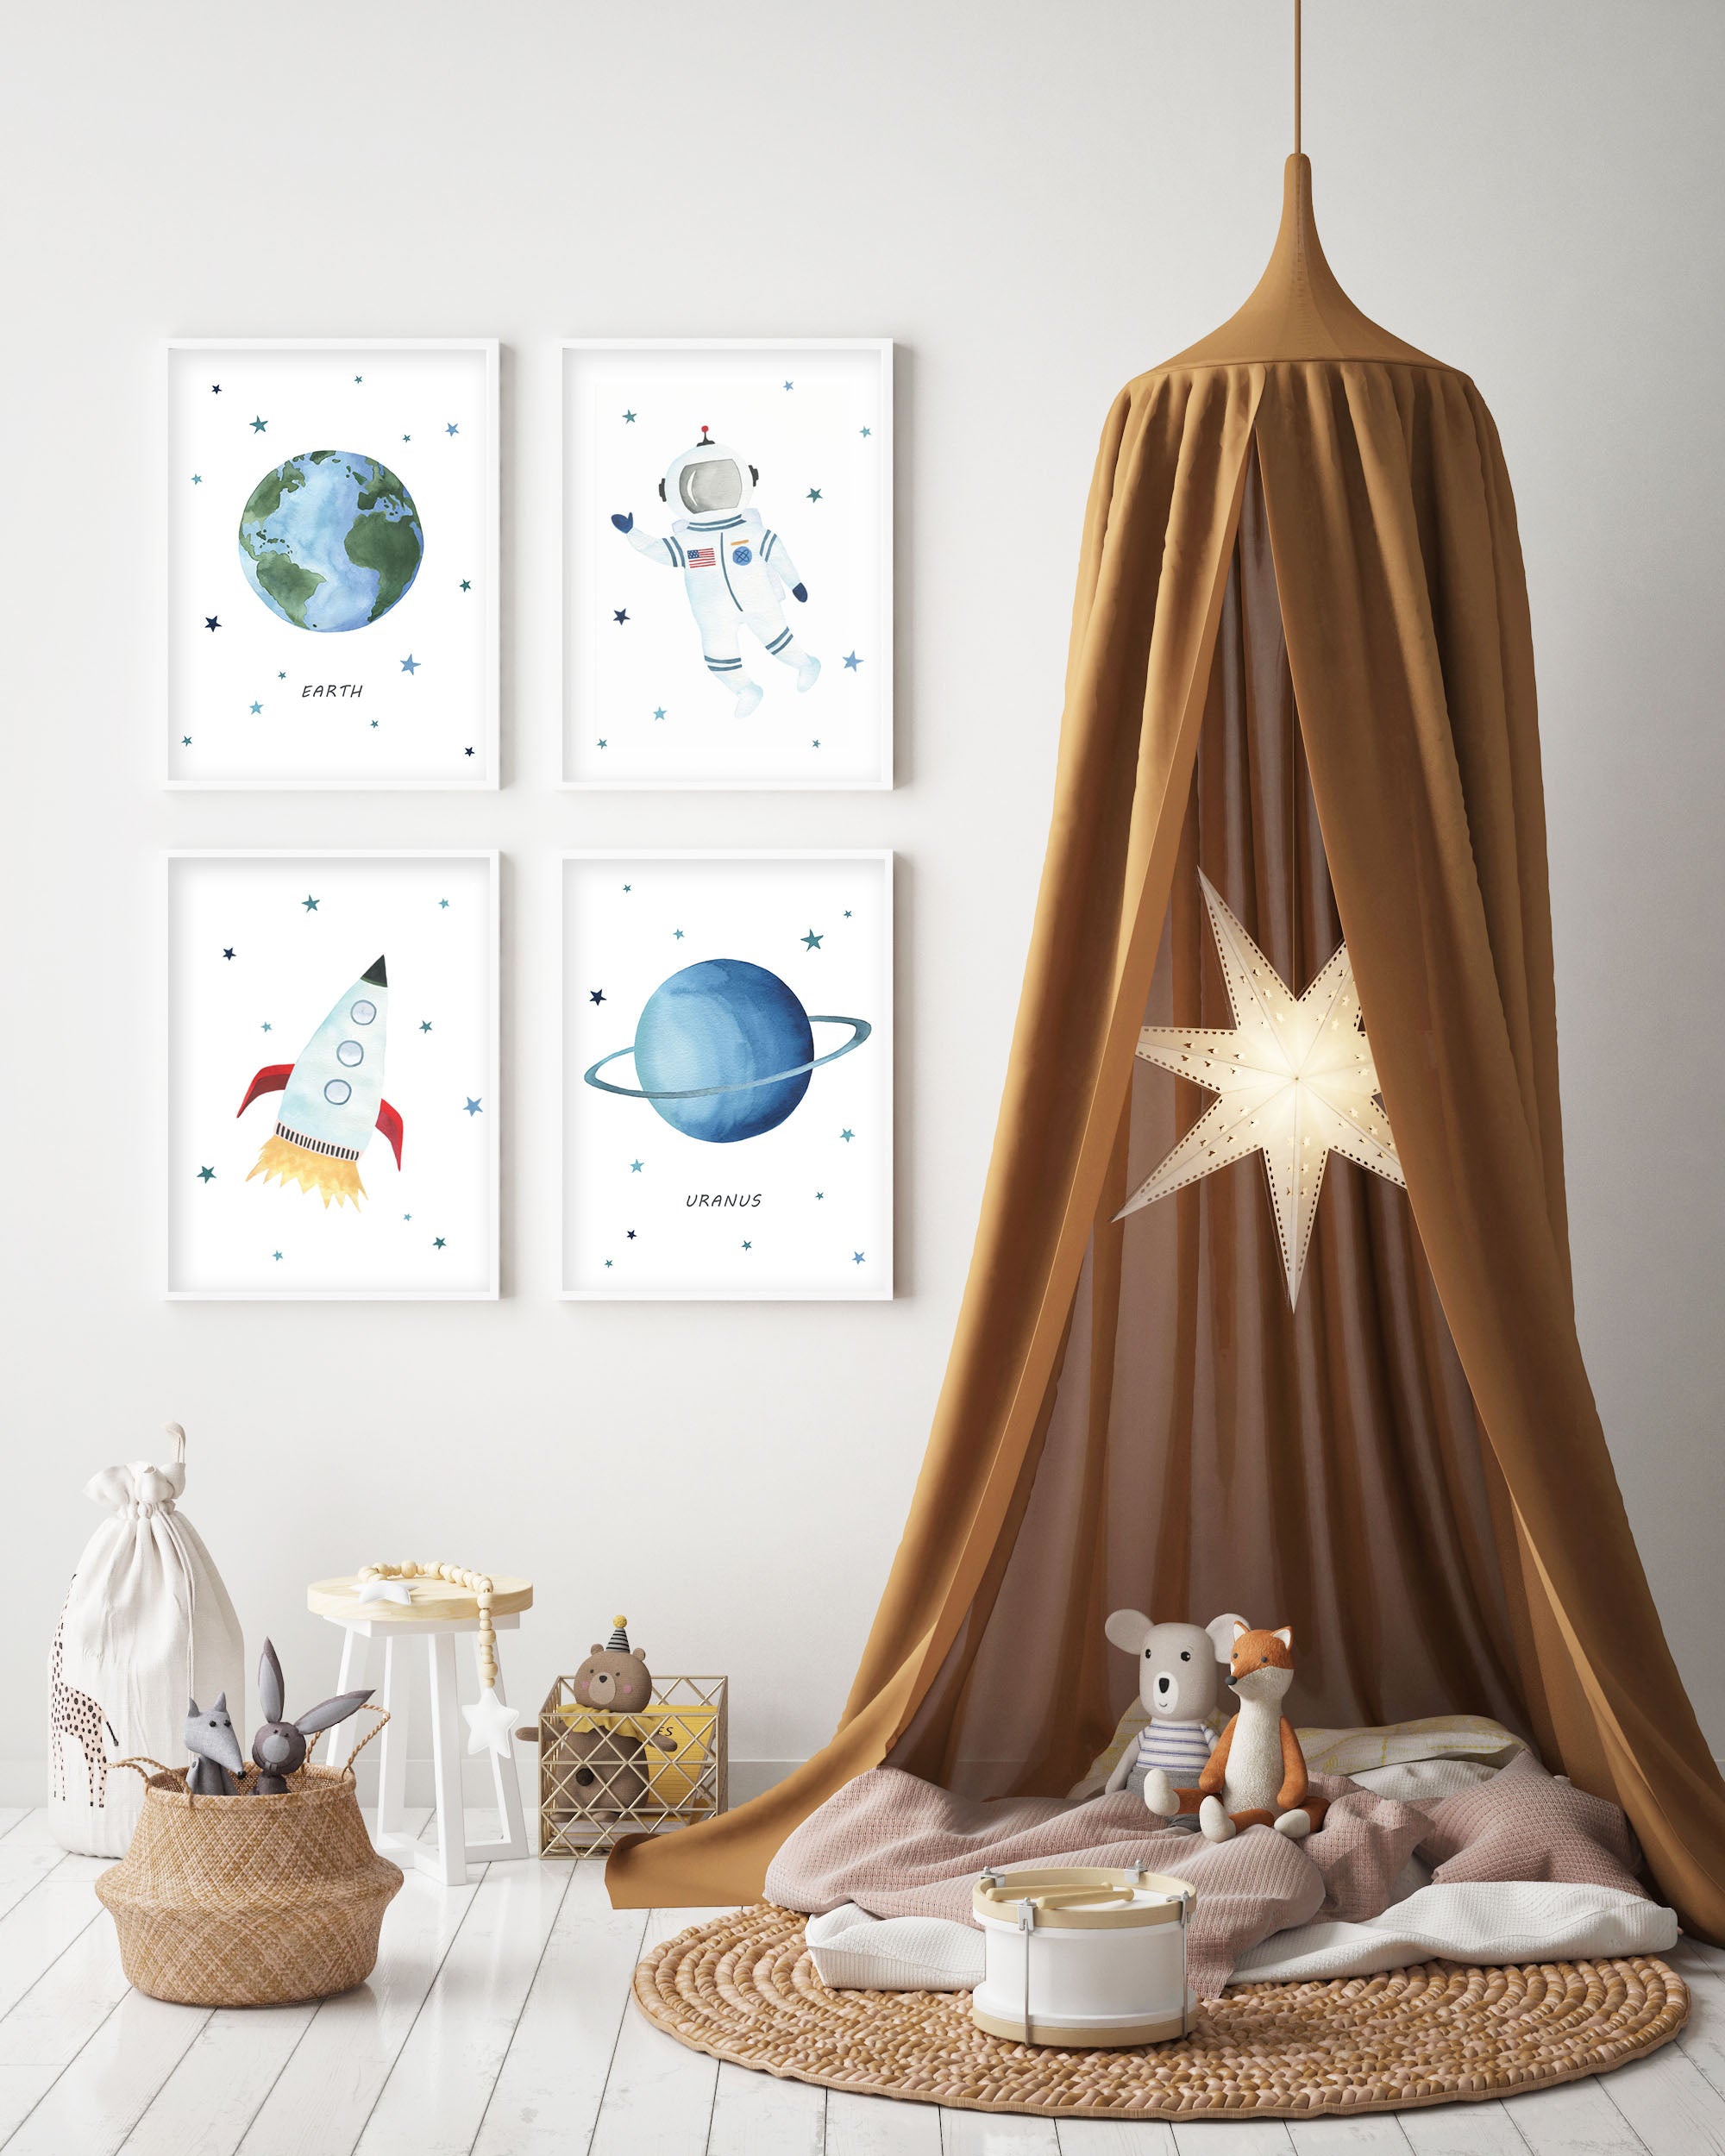 Set of 4 Outer Space Prints - Watercolor Nursery Wall Art - The Small Art Project - Modern Nursery Prints